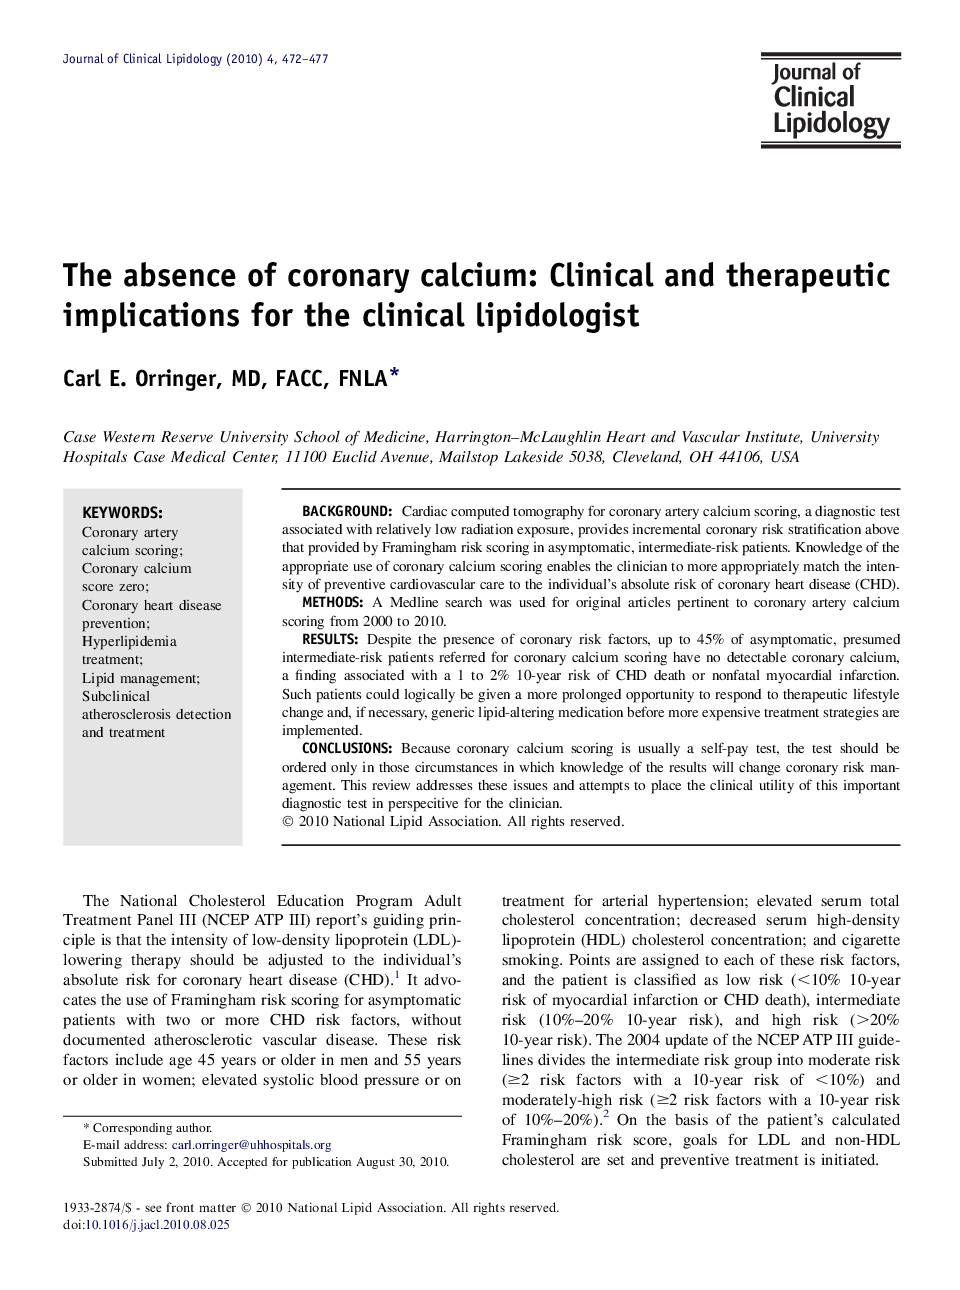 The absence of coronary calcium: Clinical and therapeutic implications for the clinical lipidologist